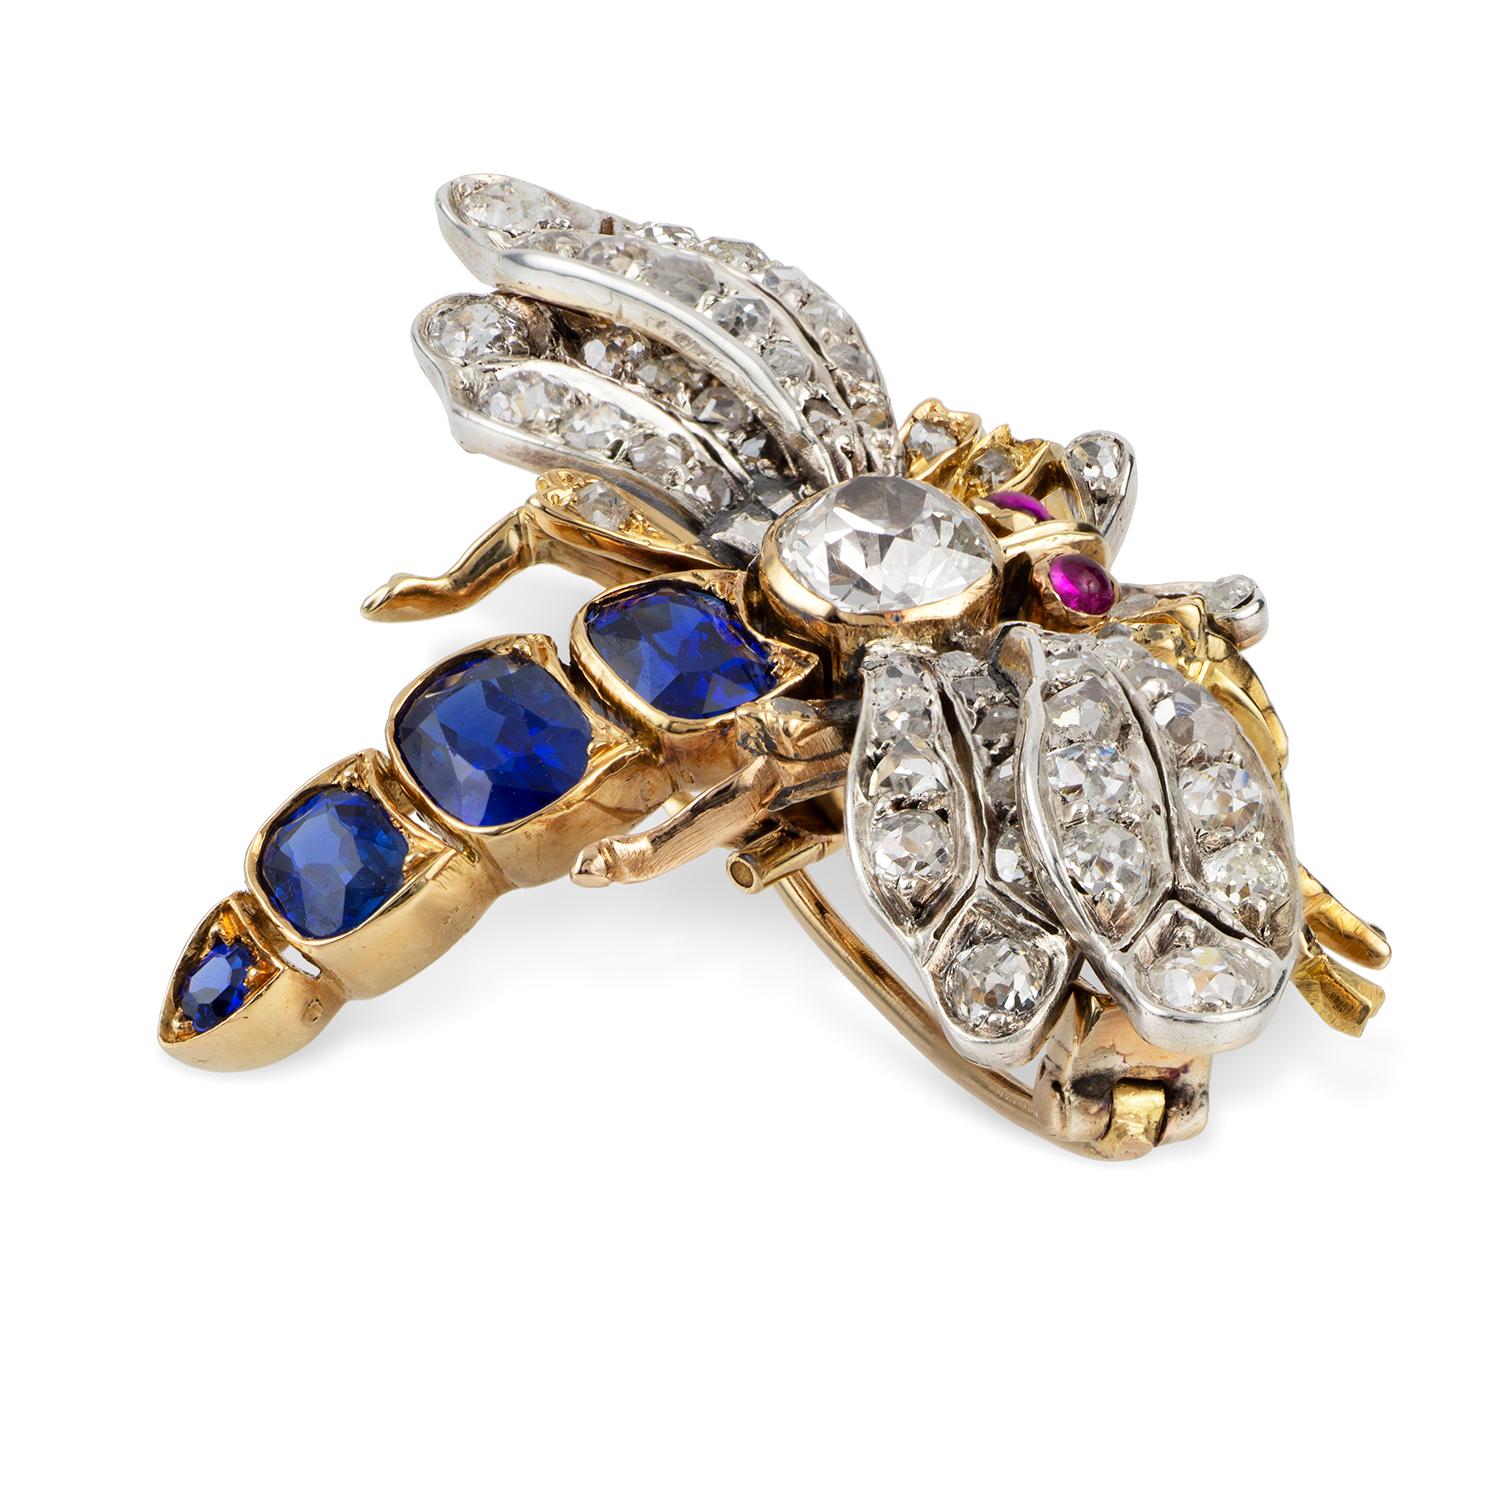 A Victorian sapphire and diamond bee brooch, the thorax set with an old-cut diamond estimated to weigh 0.8 carats, the abdomen set with four sapphires, estimated to weigh a total of 2 carats accompanied by Gem & Pearl Lab Report 17165 stating to be